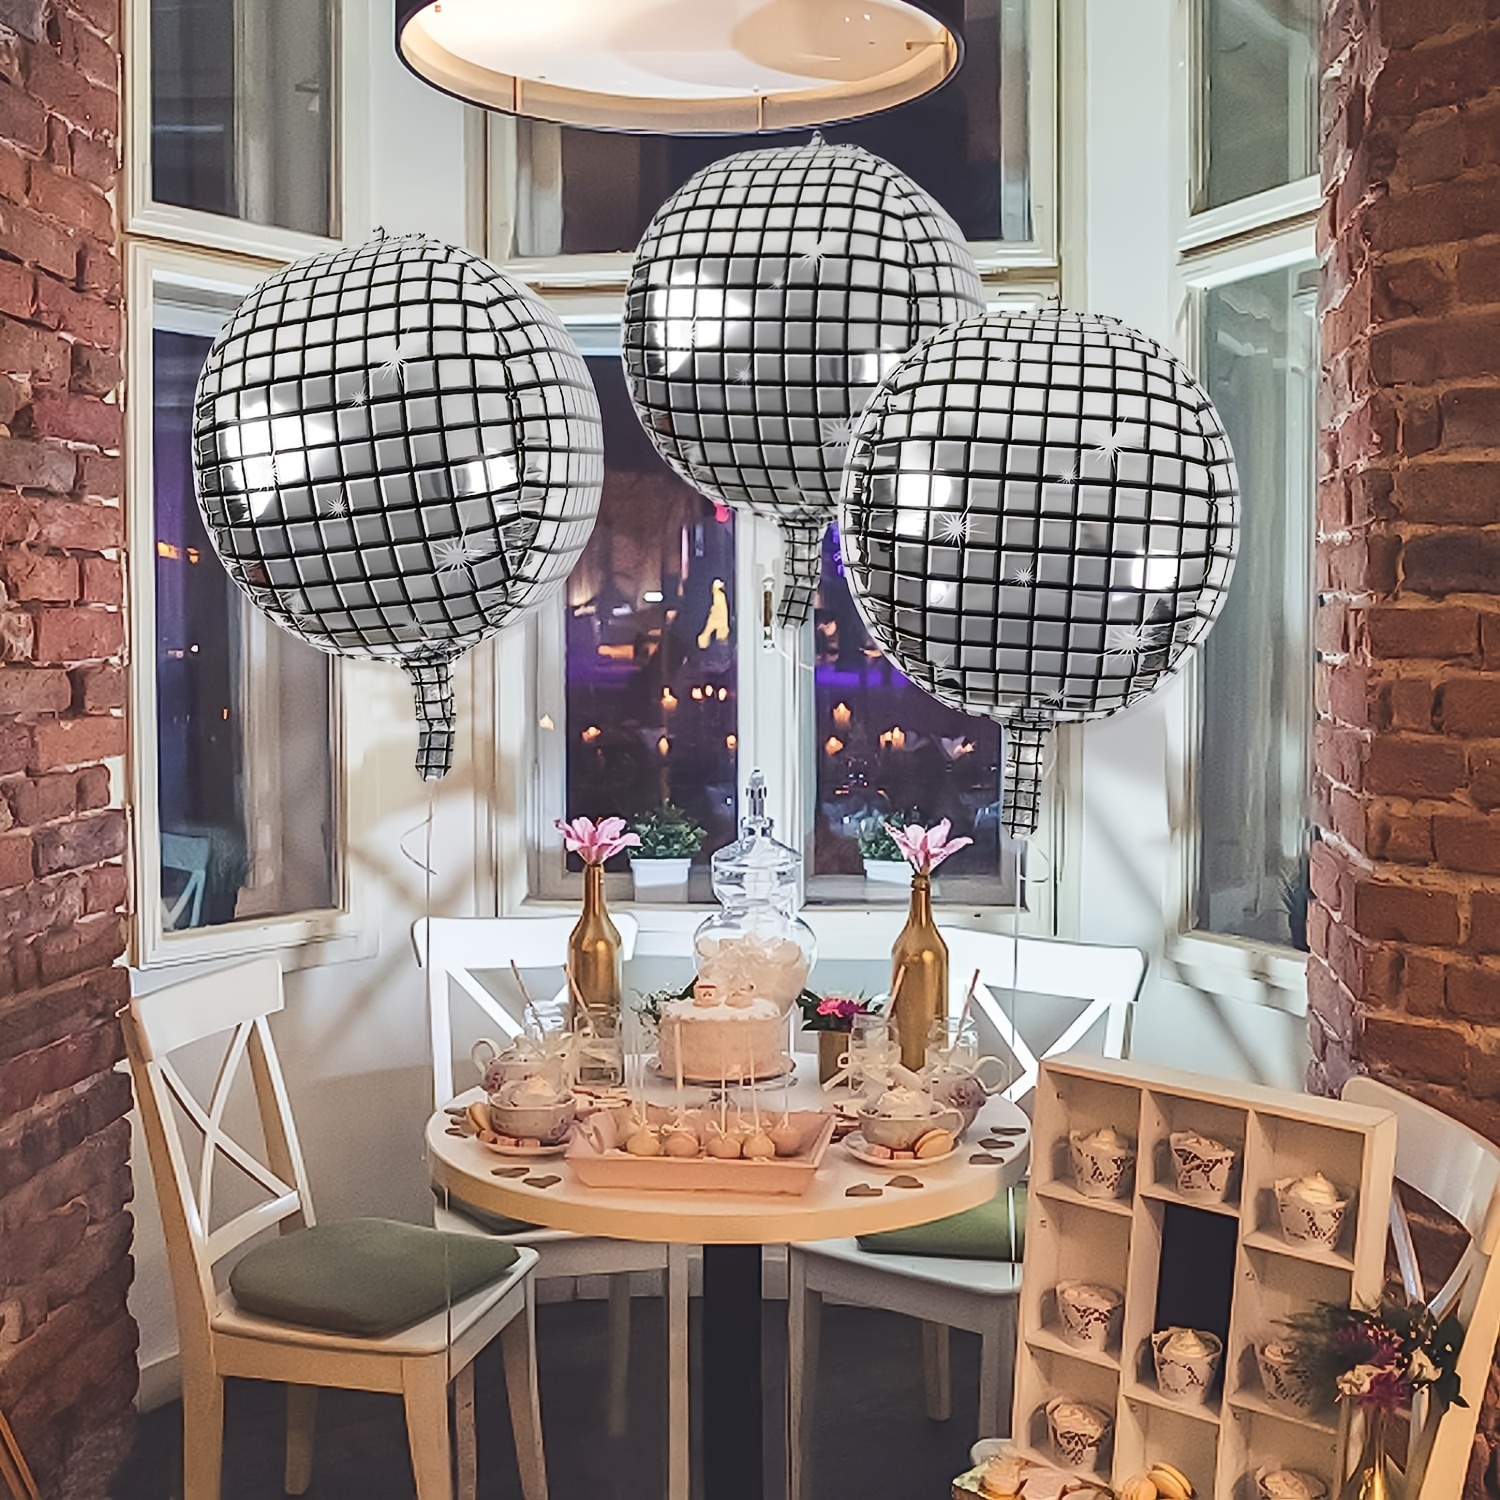 25 Disco Ball Decor Ideas That'll Get The Party Started Faster No Matter  The Season • Inspired Design Talk